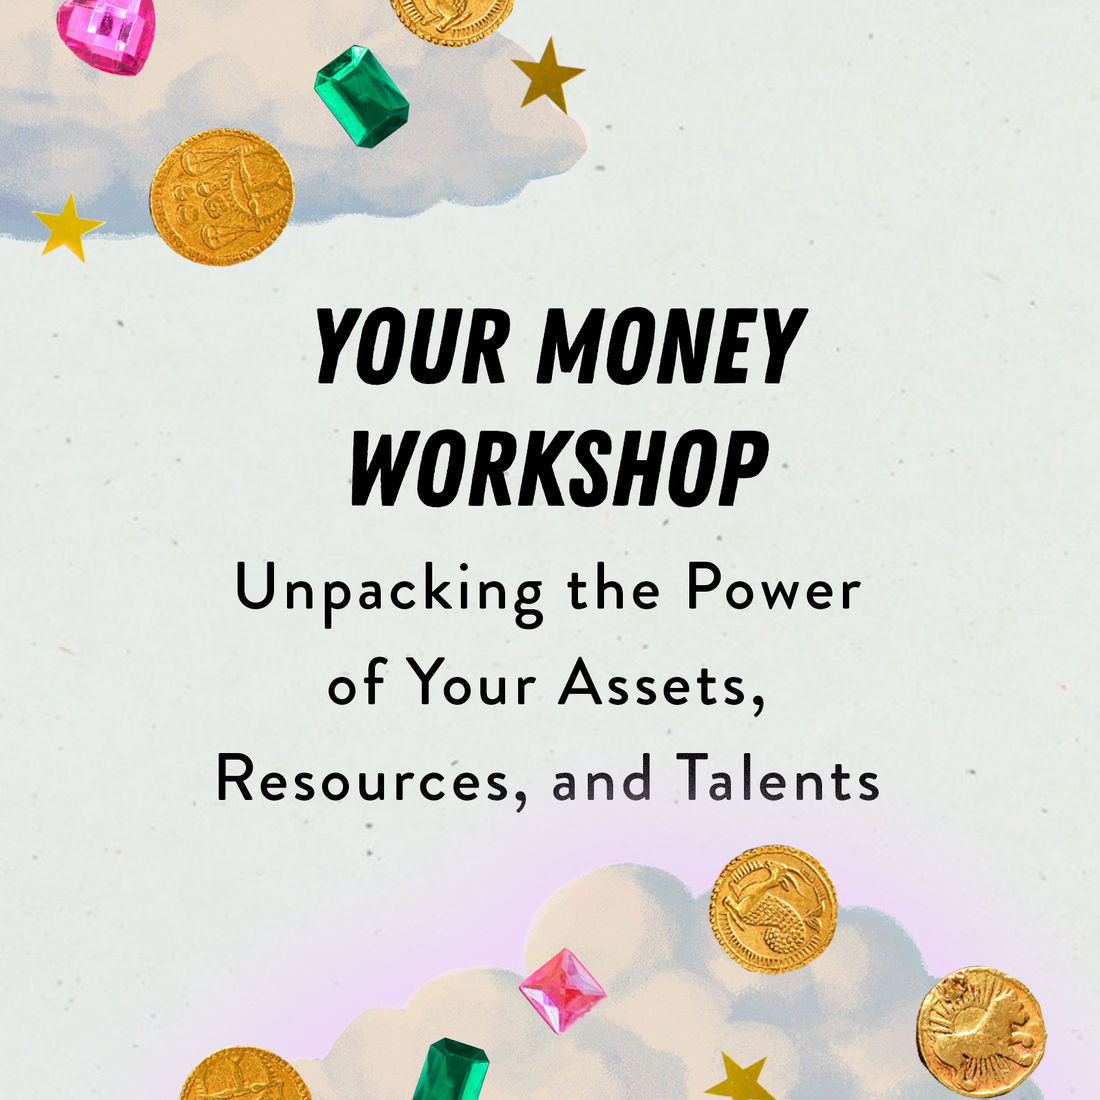 Your Money Workshop: Unpacking the Power of Your Assets, Resources, and Talents